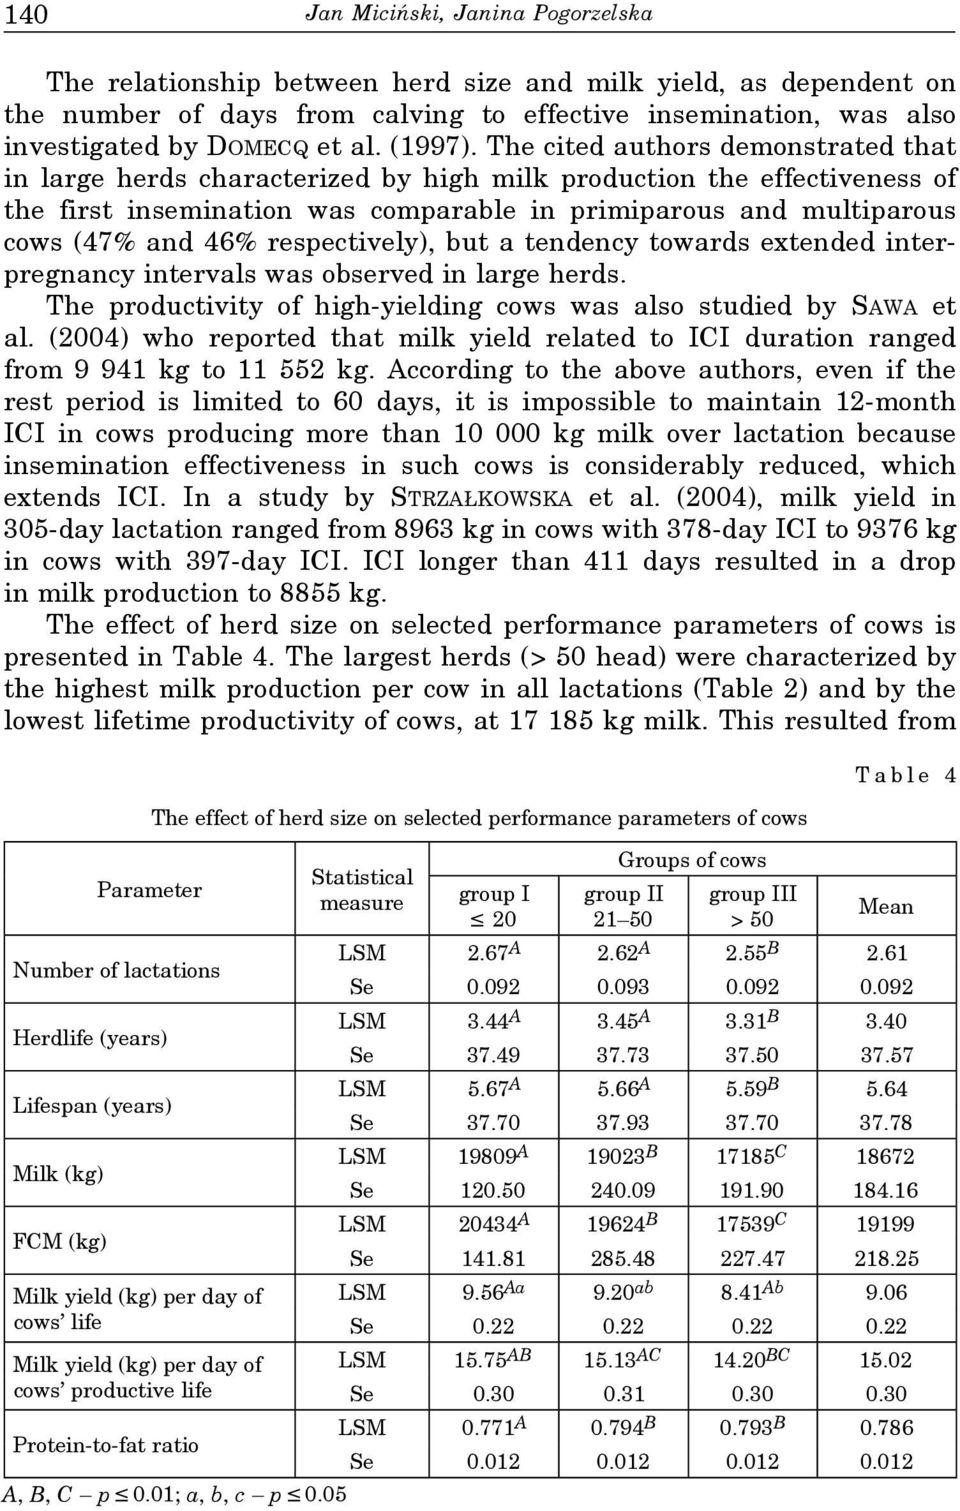 The cited authors demonstrated that in large herds characterized by high milk production the effectiveness of the first insemination was comparable in primiparous and multiparous cows (47% and 46%